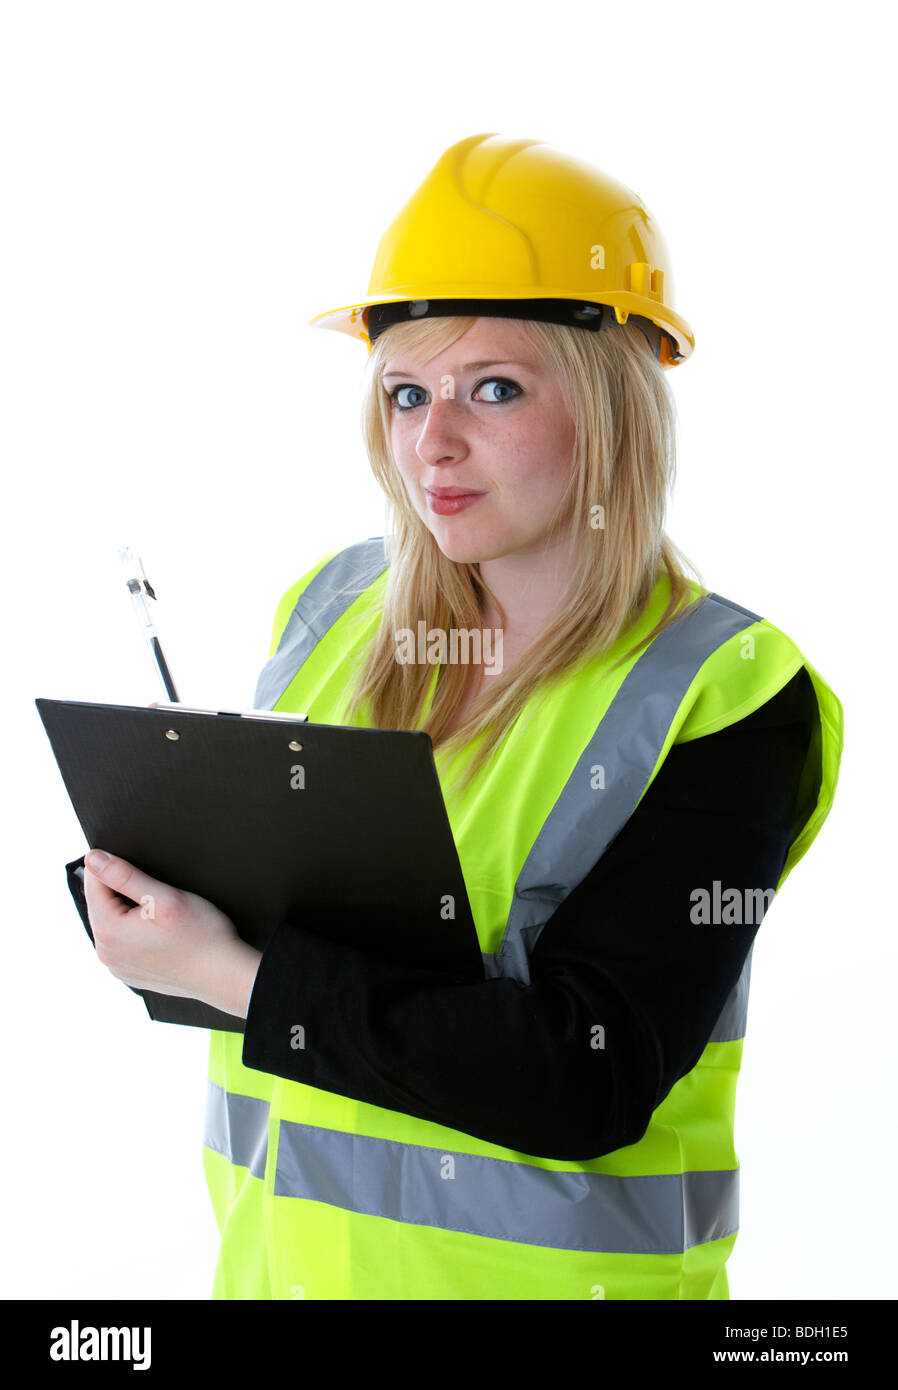 young 20 year old blonde woman wearing yellow hard hat and high vis vest writing on a clipboard with eye contact taking notes observing manager Stock Photo